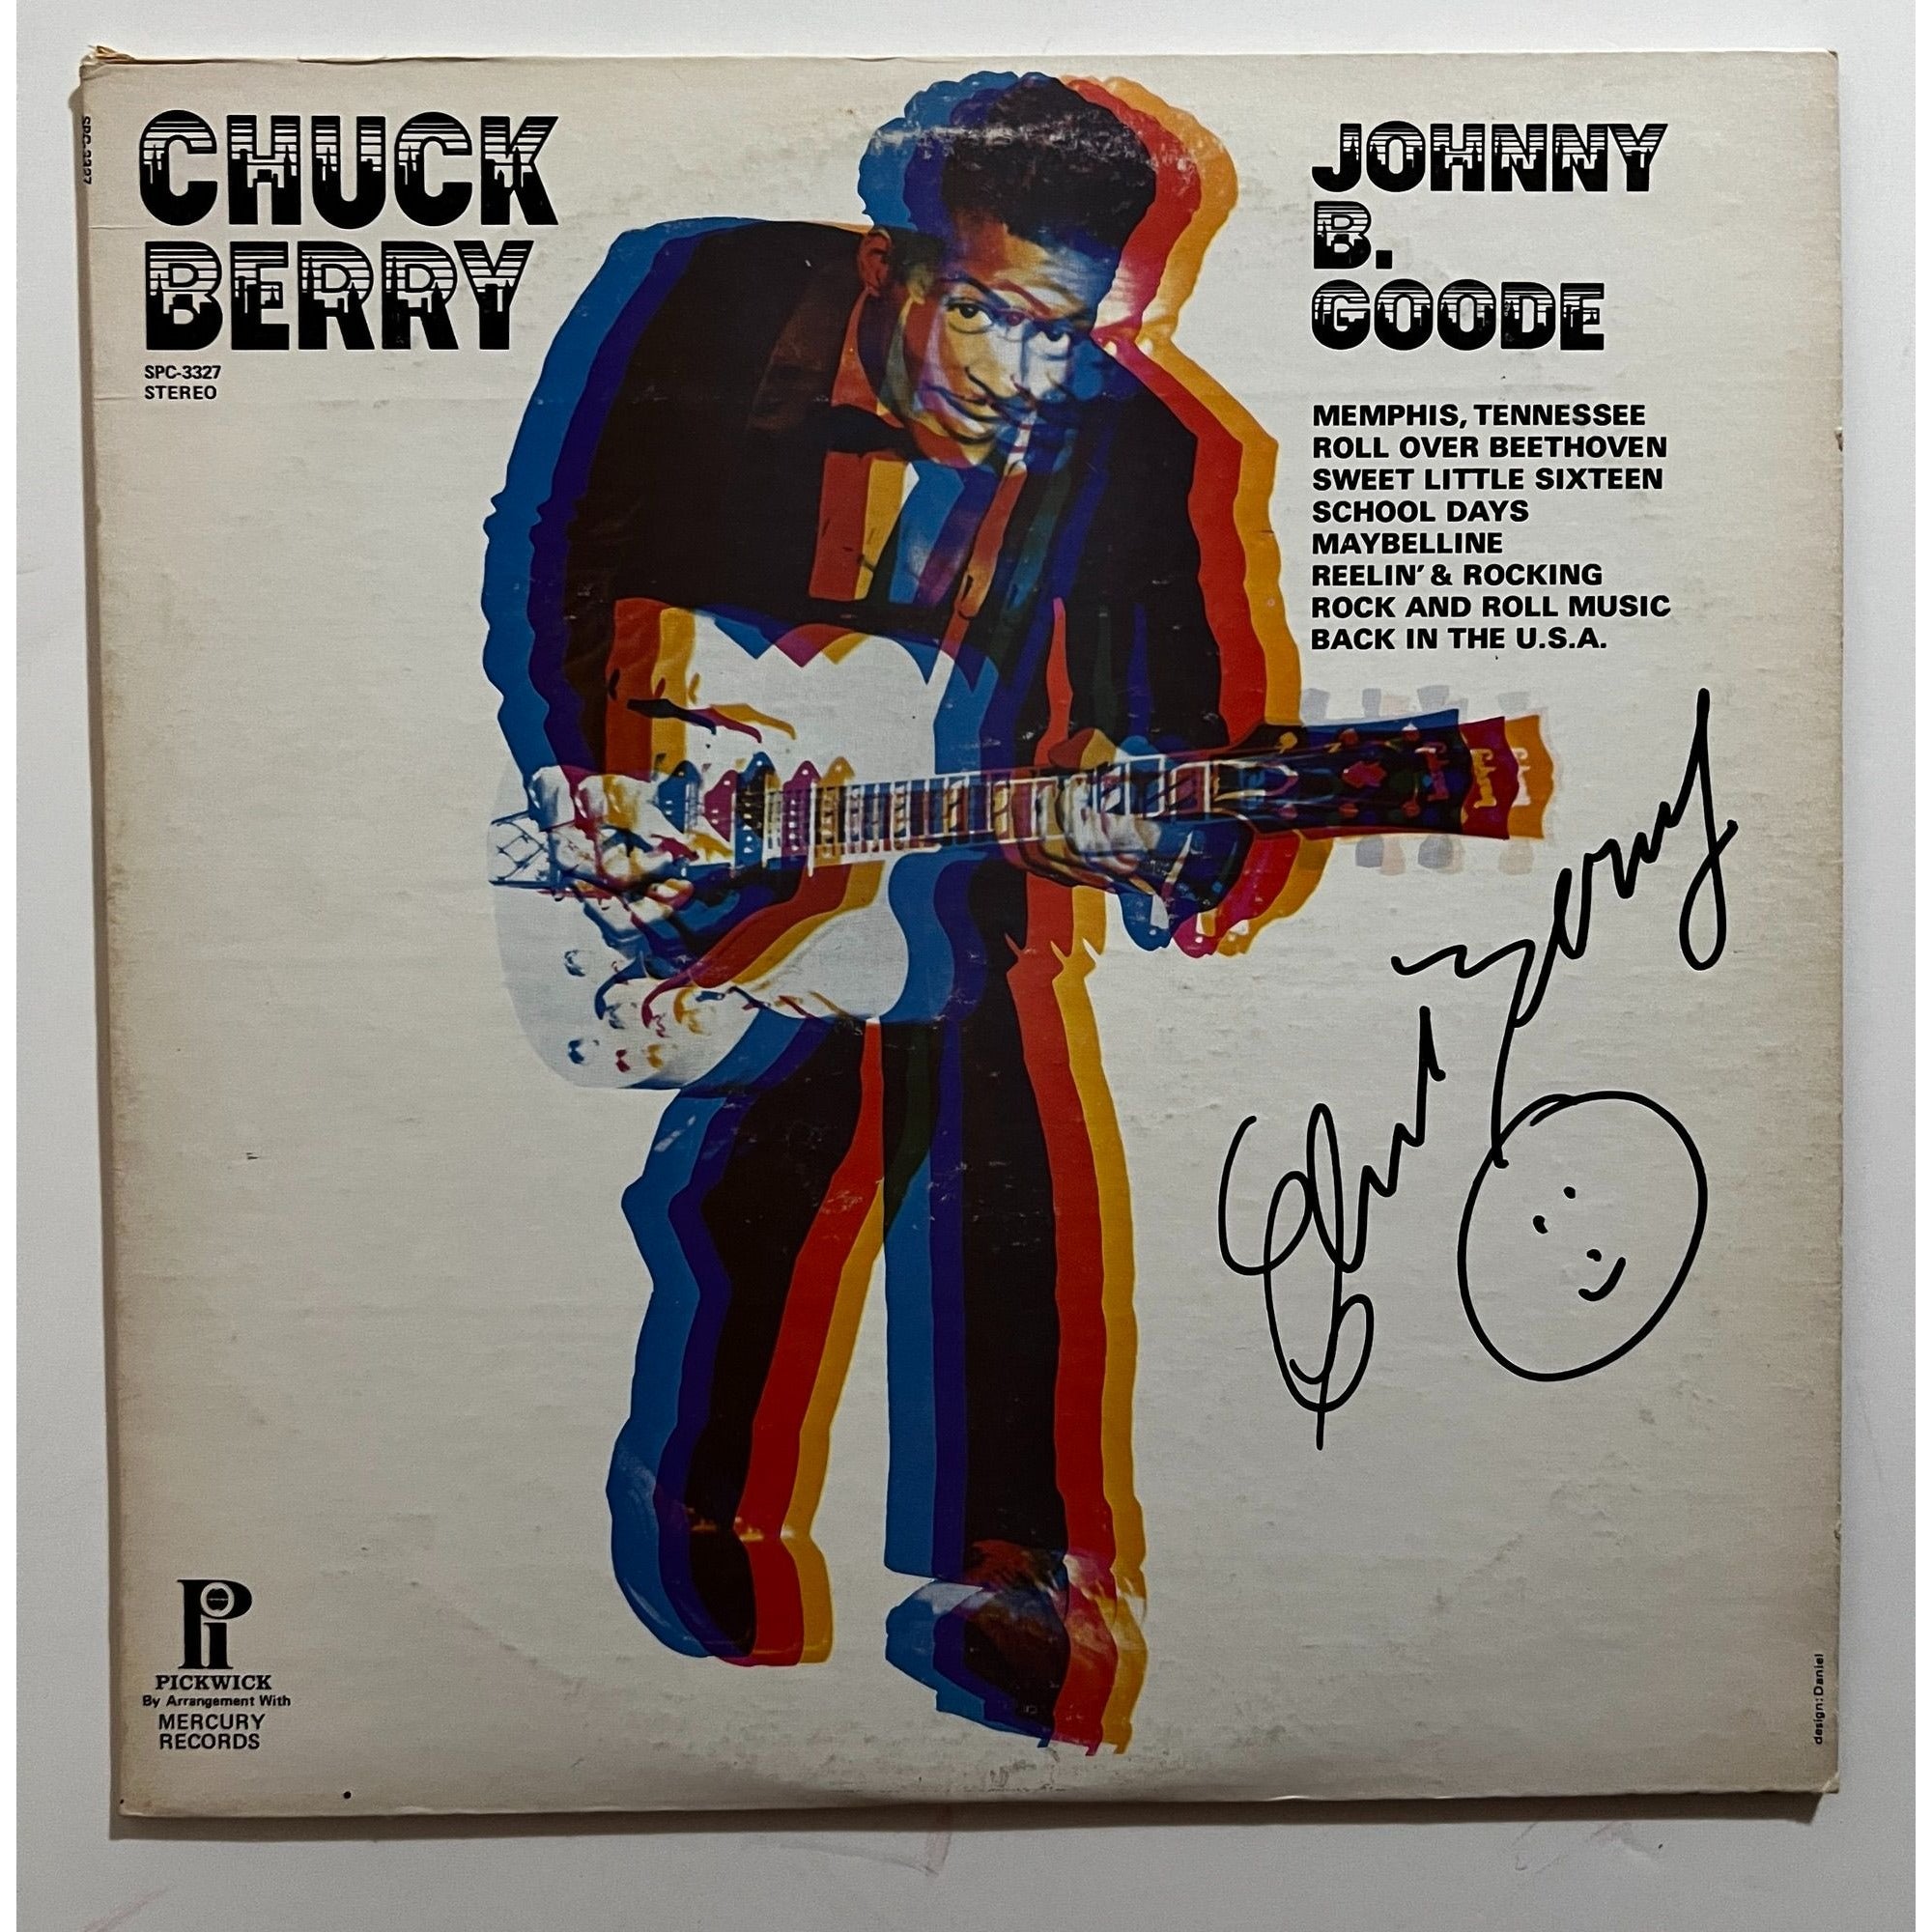 Chuck Berry "Johnny B Goode" original LP signed with proof